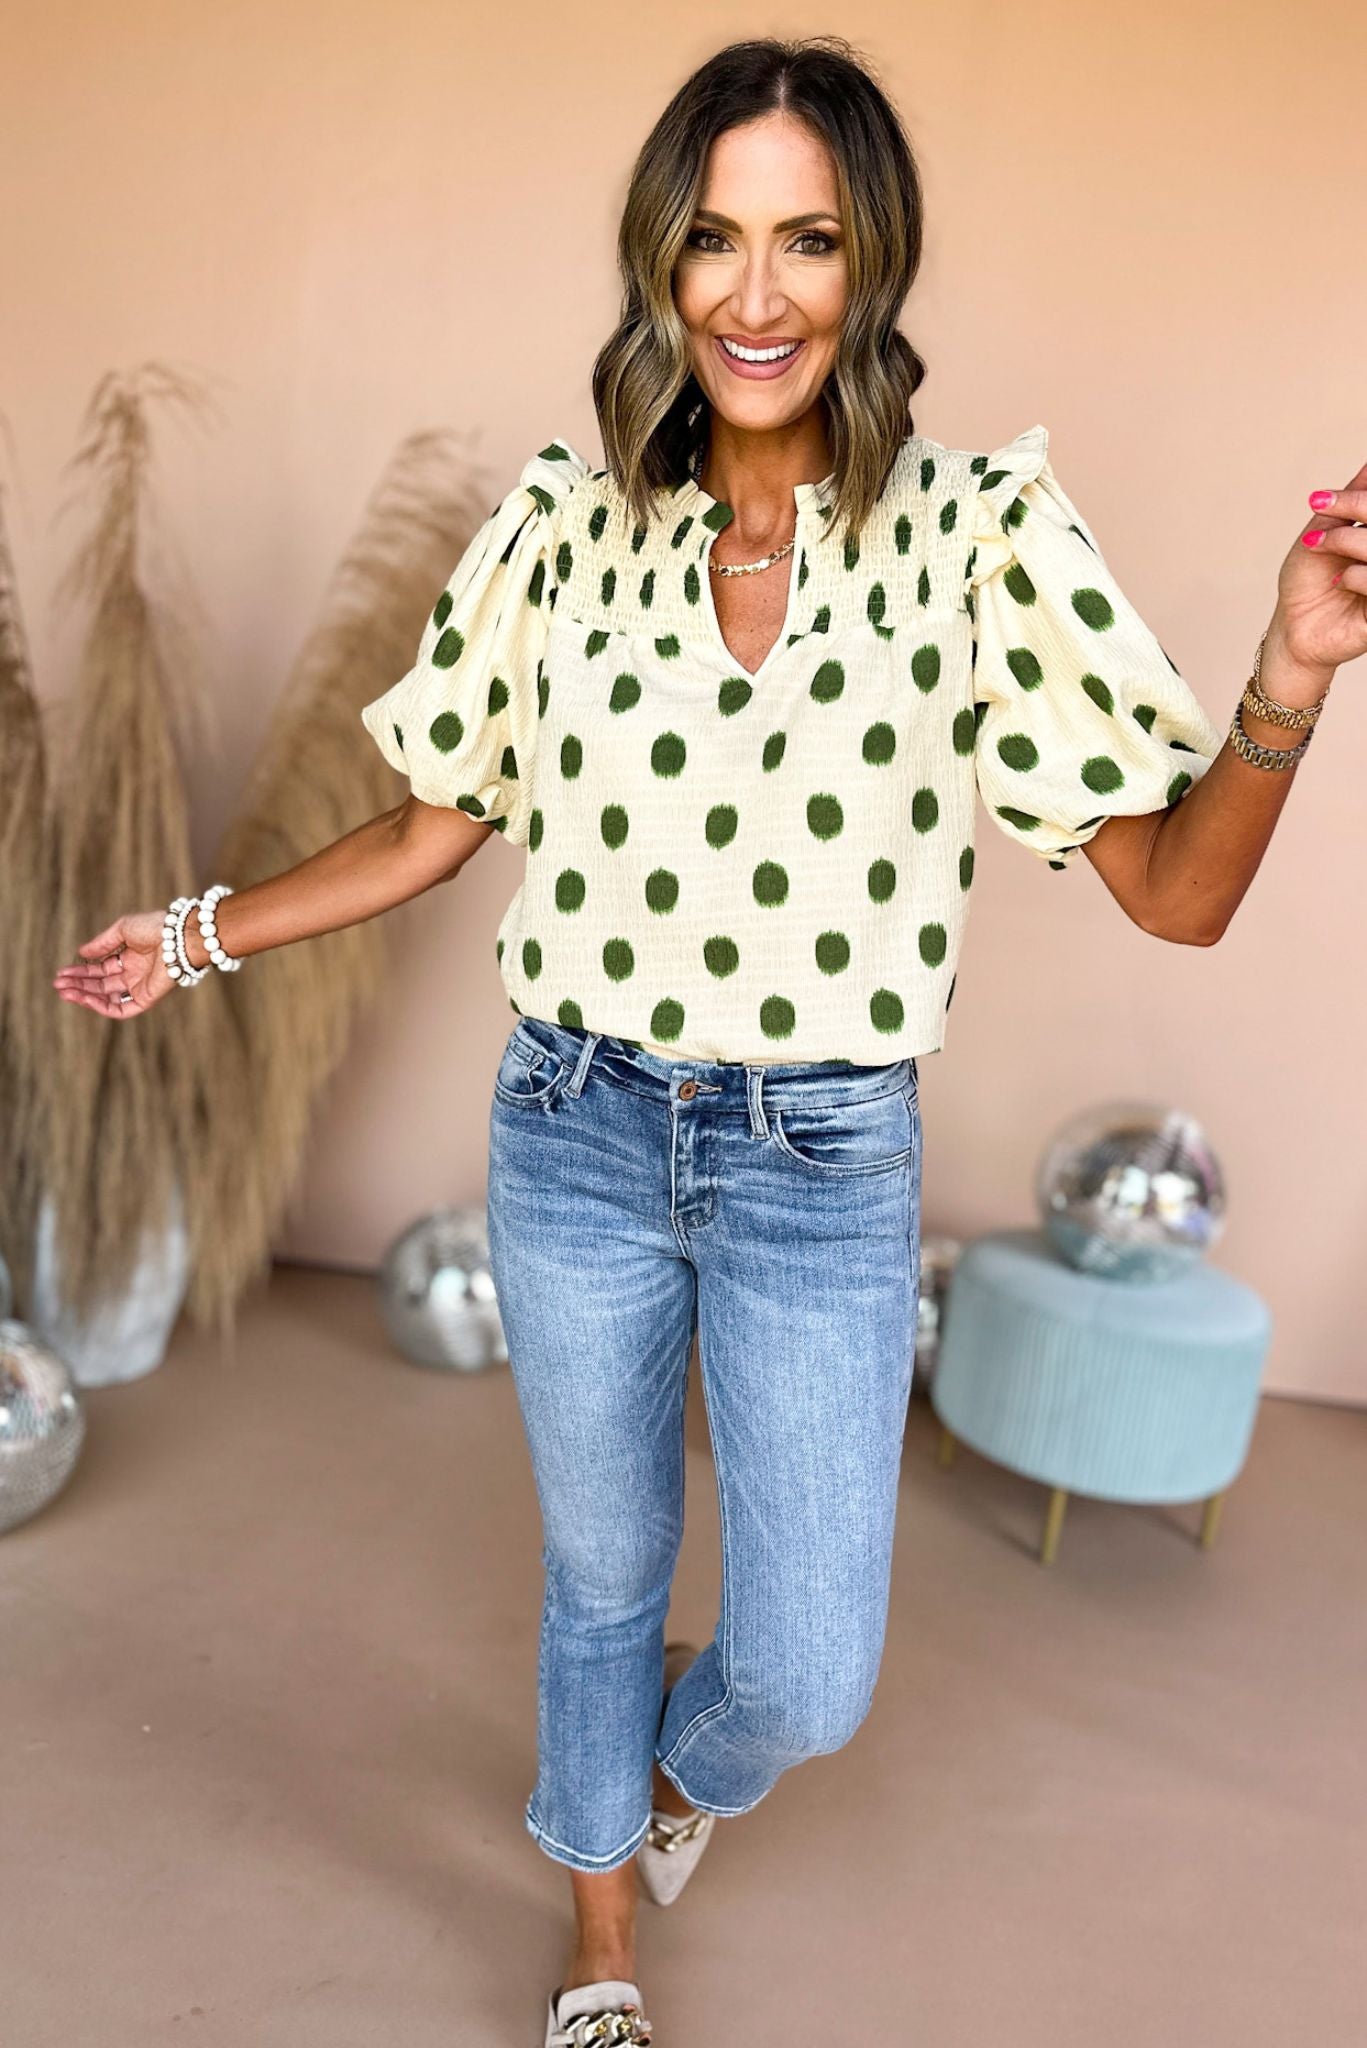 THML Cream Polka Dot Printed Puff Short Sleeve Top, thml, elevated style, mom style, must have, coming soon, shop style your senses by mallory fitzsimmons